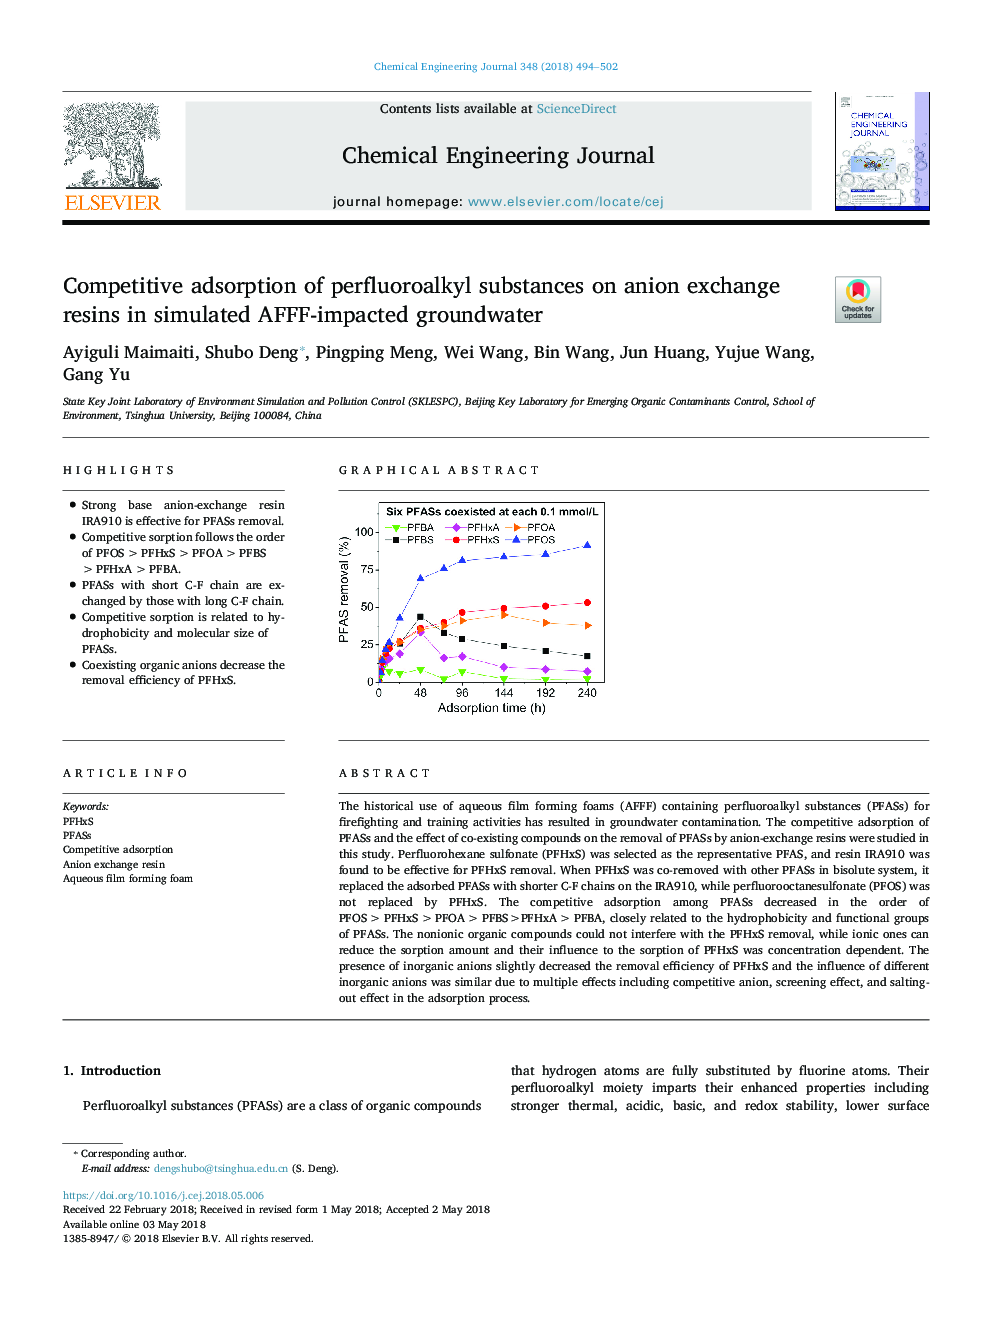 Competitive adsorption of perfluoroalkyl substances on anion exchange resins in simulated AFFF-impacted groundwater